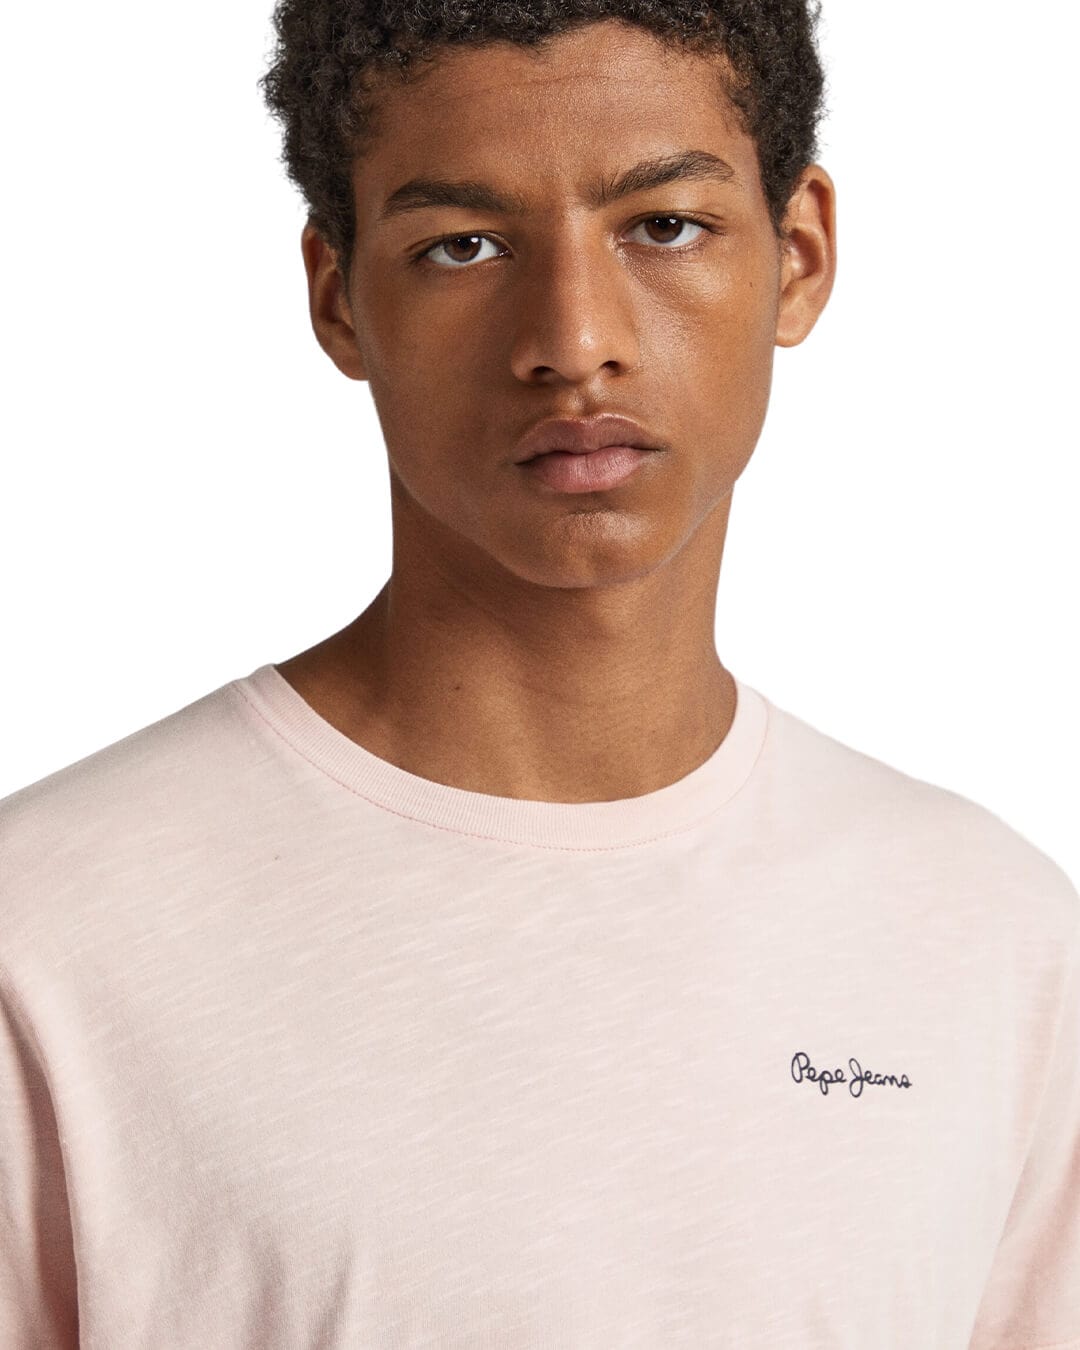 Pepe Jeans T-Shirts Pepe Jeans Wiltshirte Pink T-Shirt